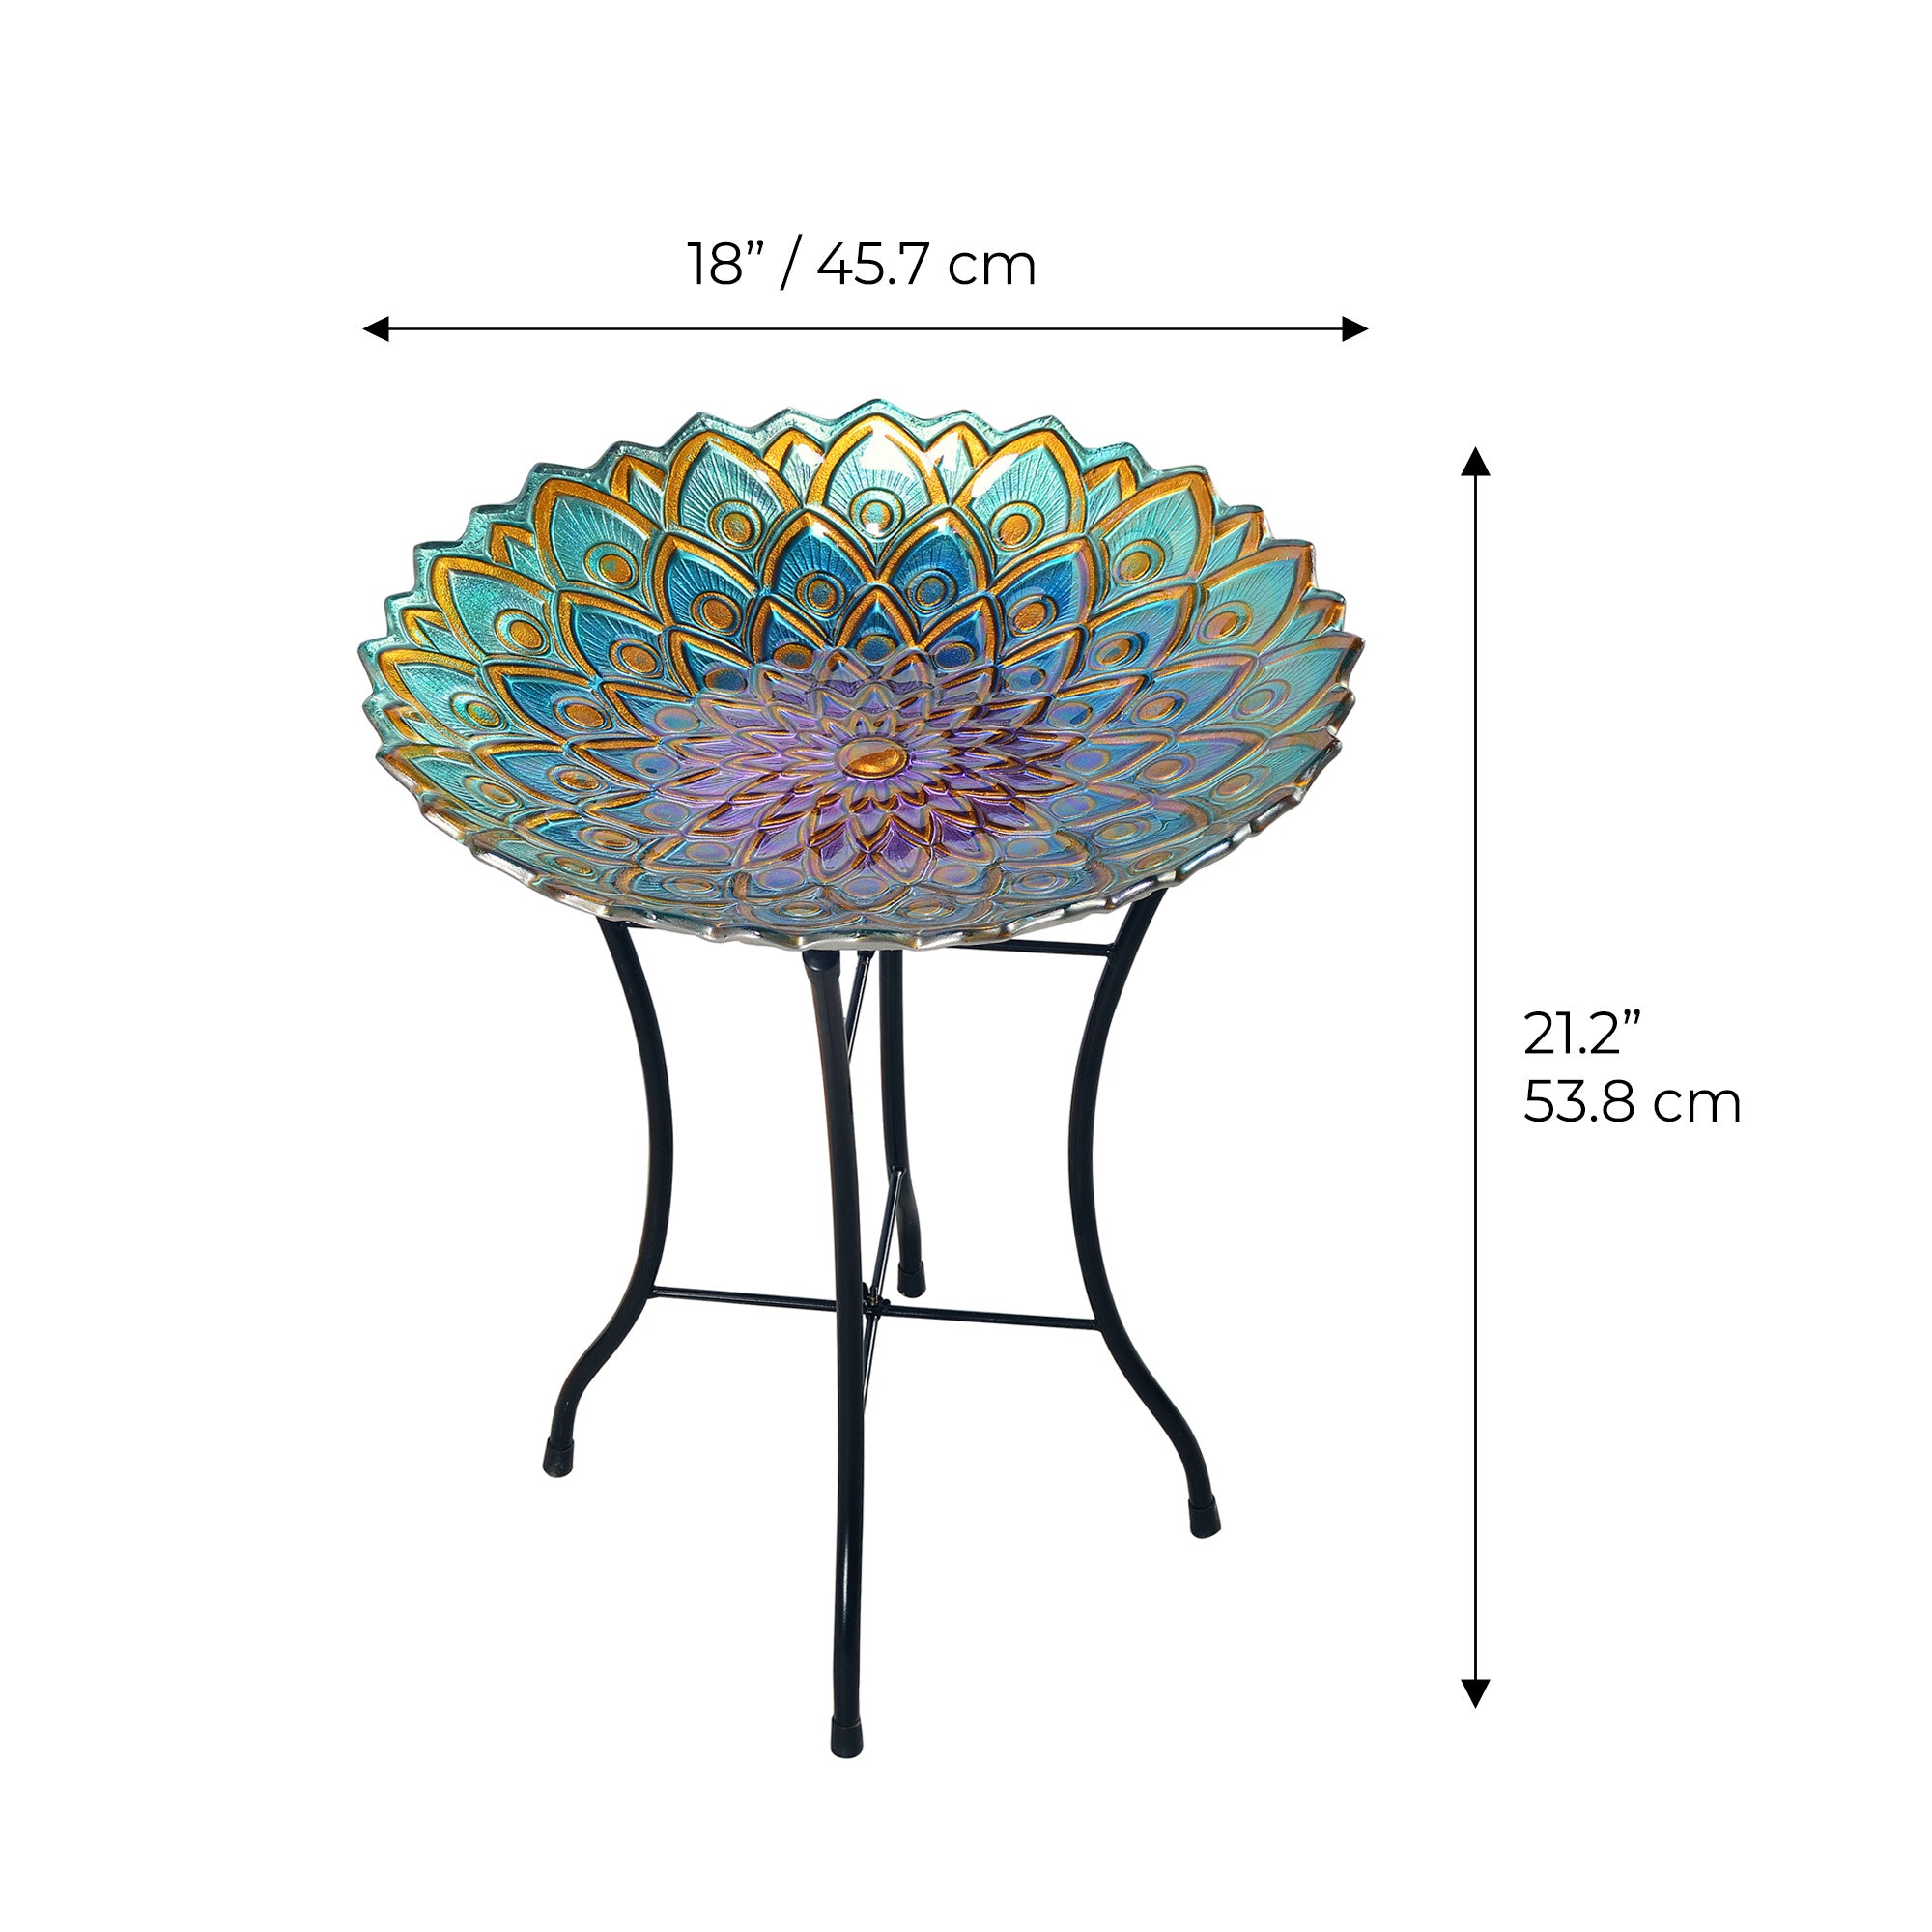 Teamson Home 18" Glass Mosaic Flower Bird Bath with Stand, Multicolor